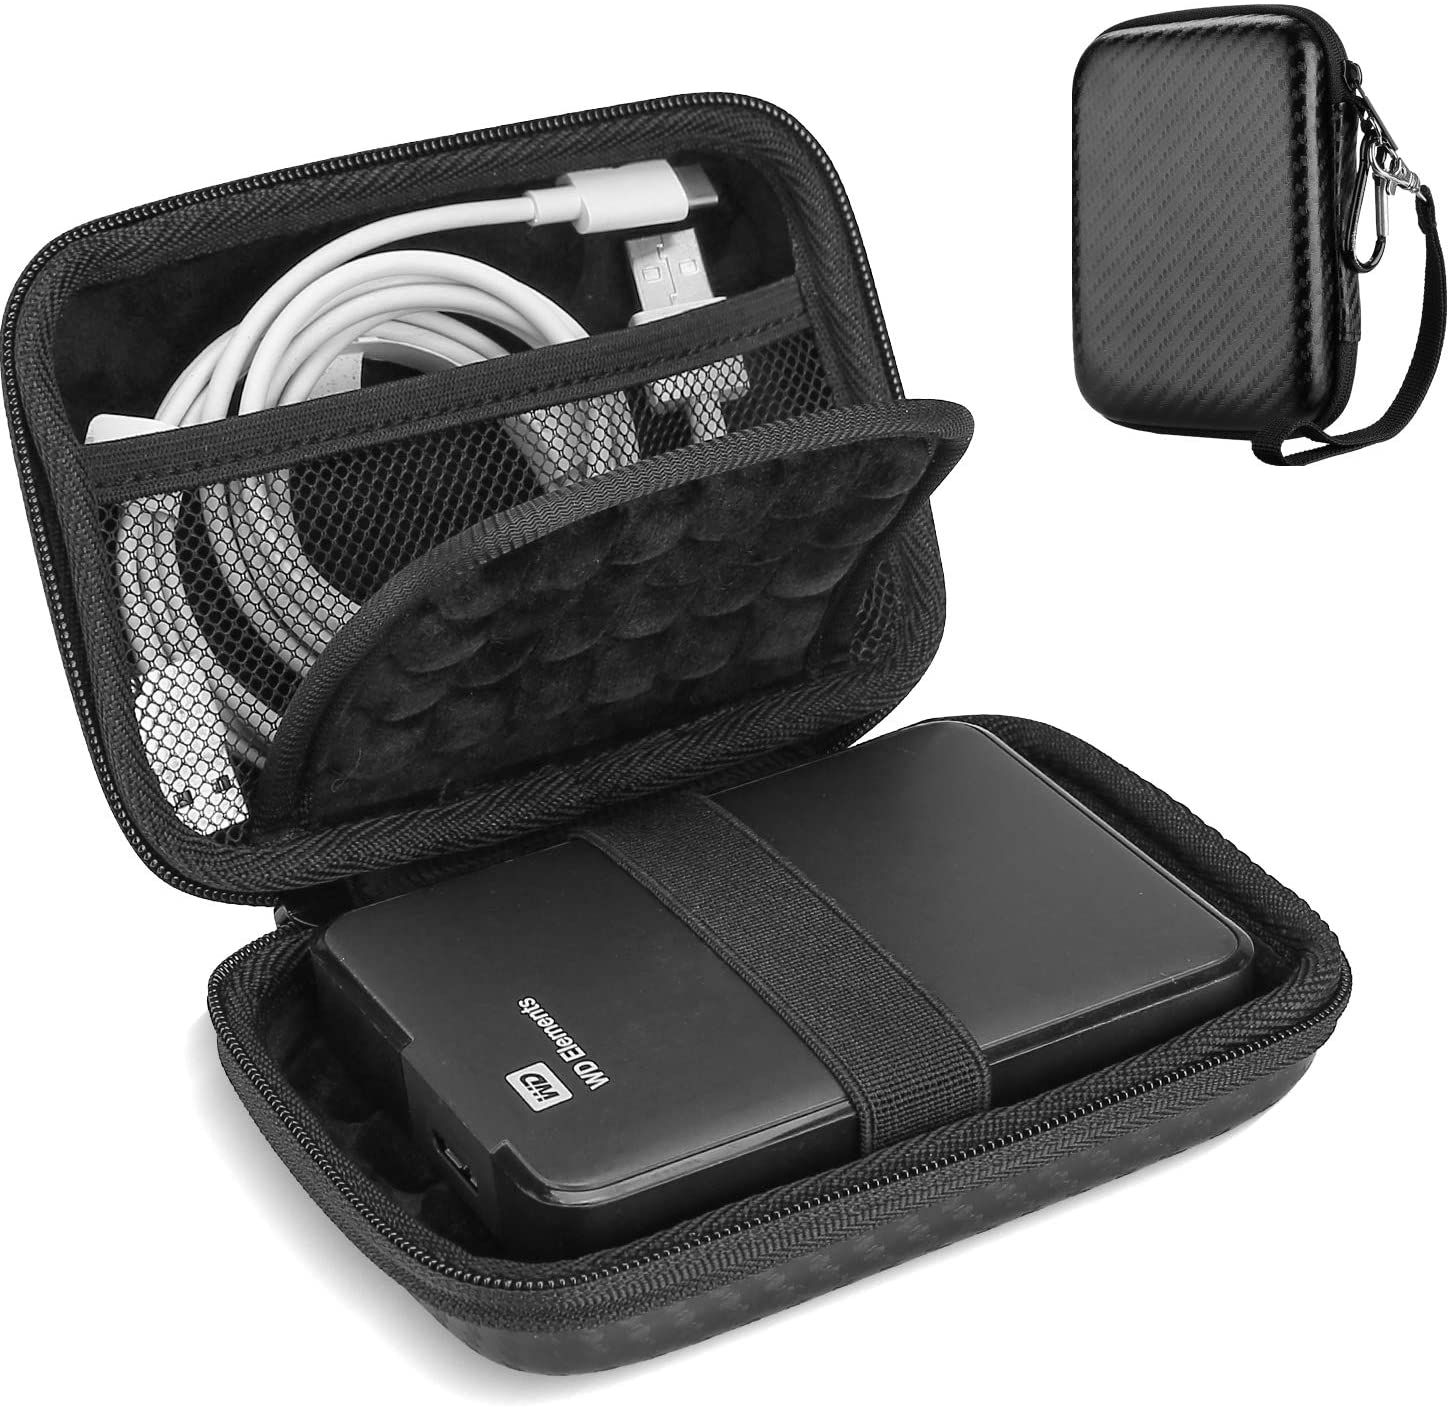 CASE ONLY) Hard Protective Case for Western Digital My Passport